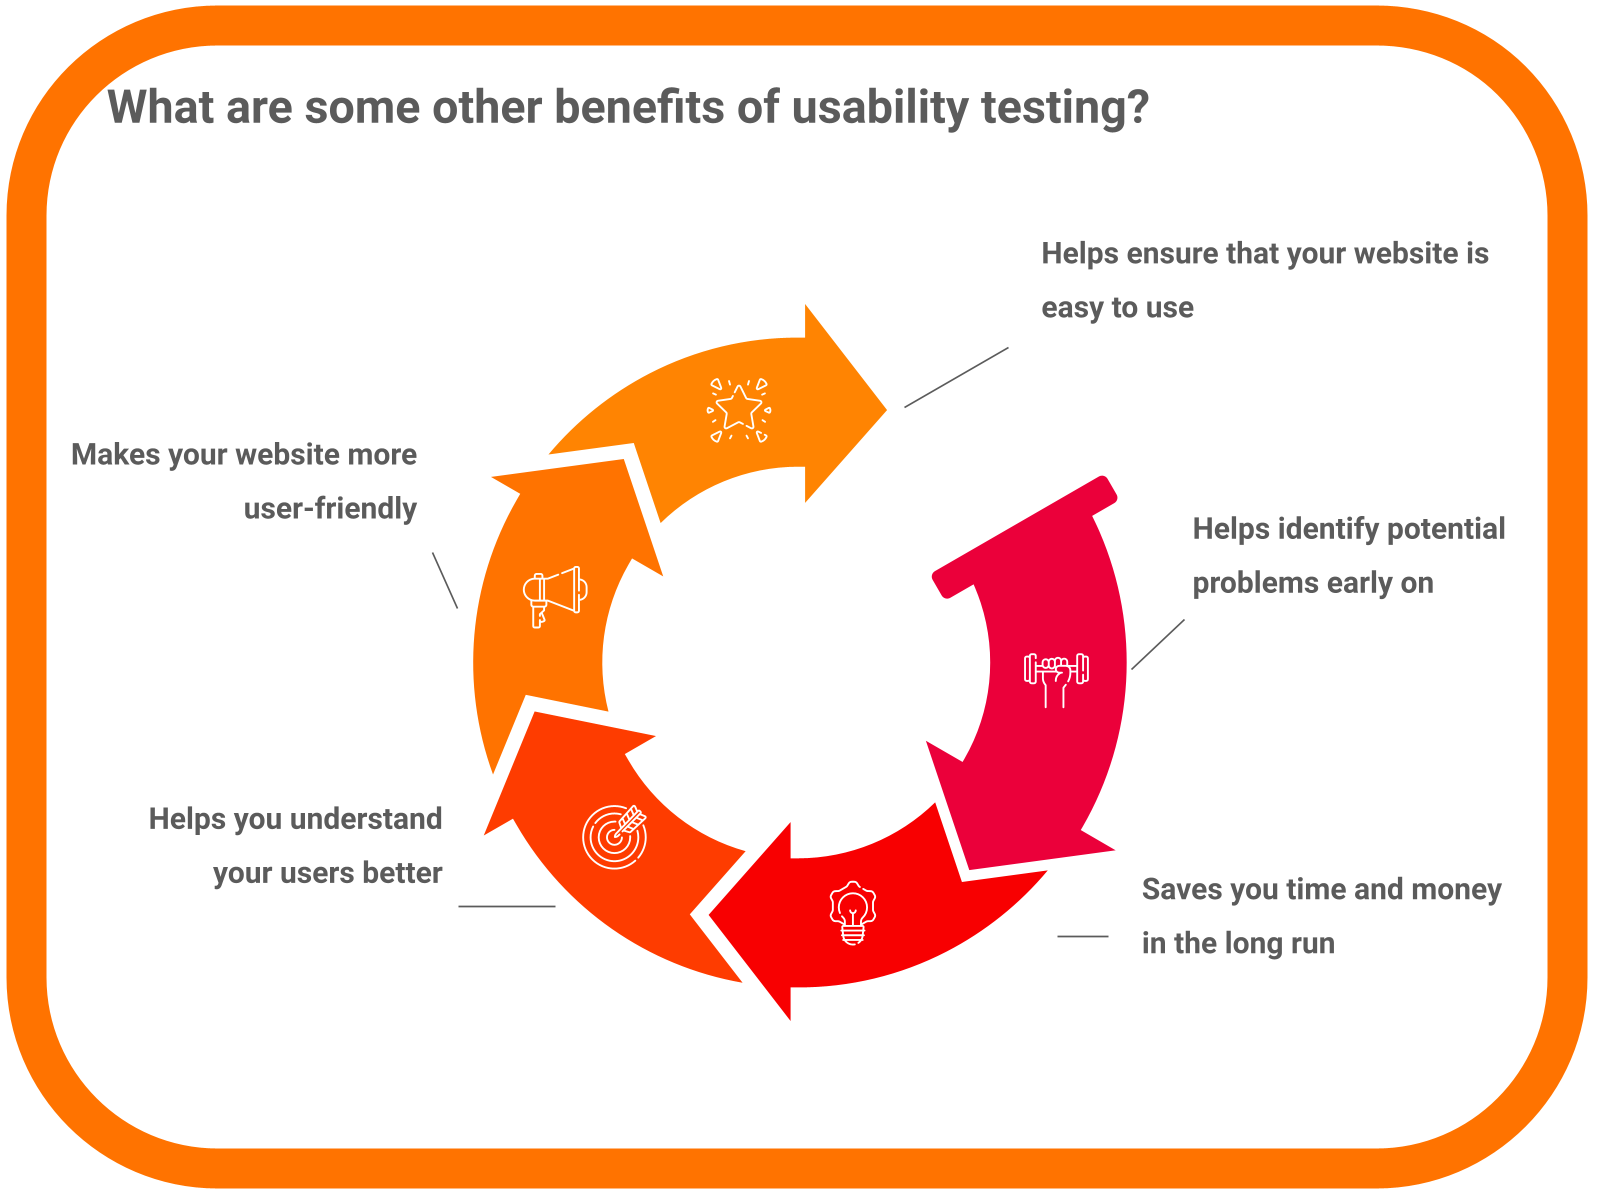 What are some other benefits of usability testing?